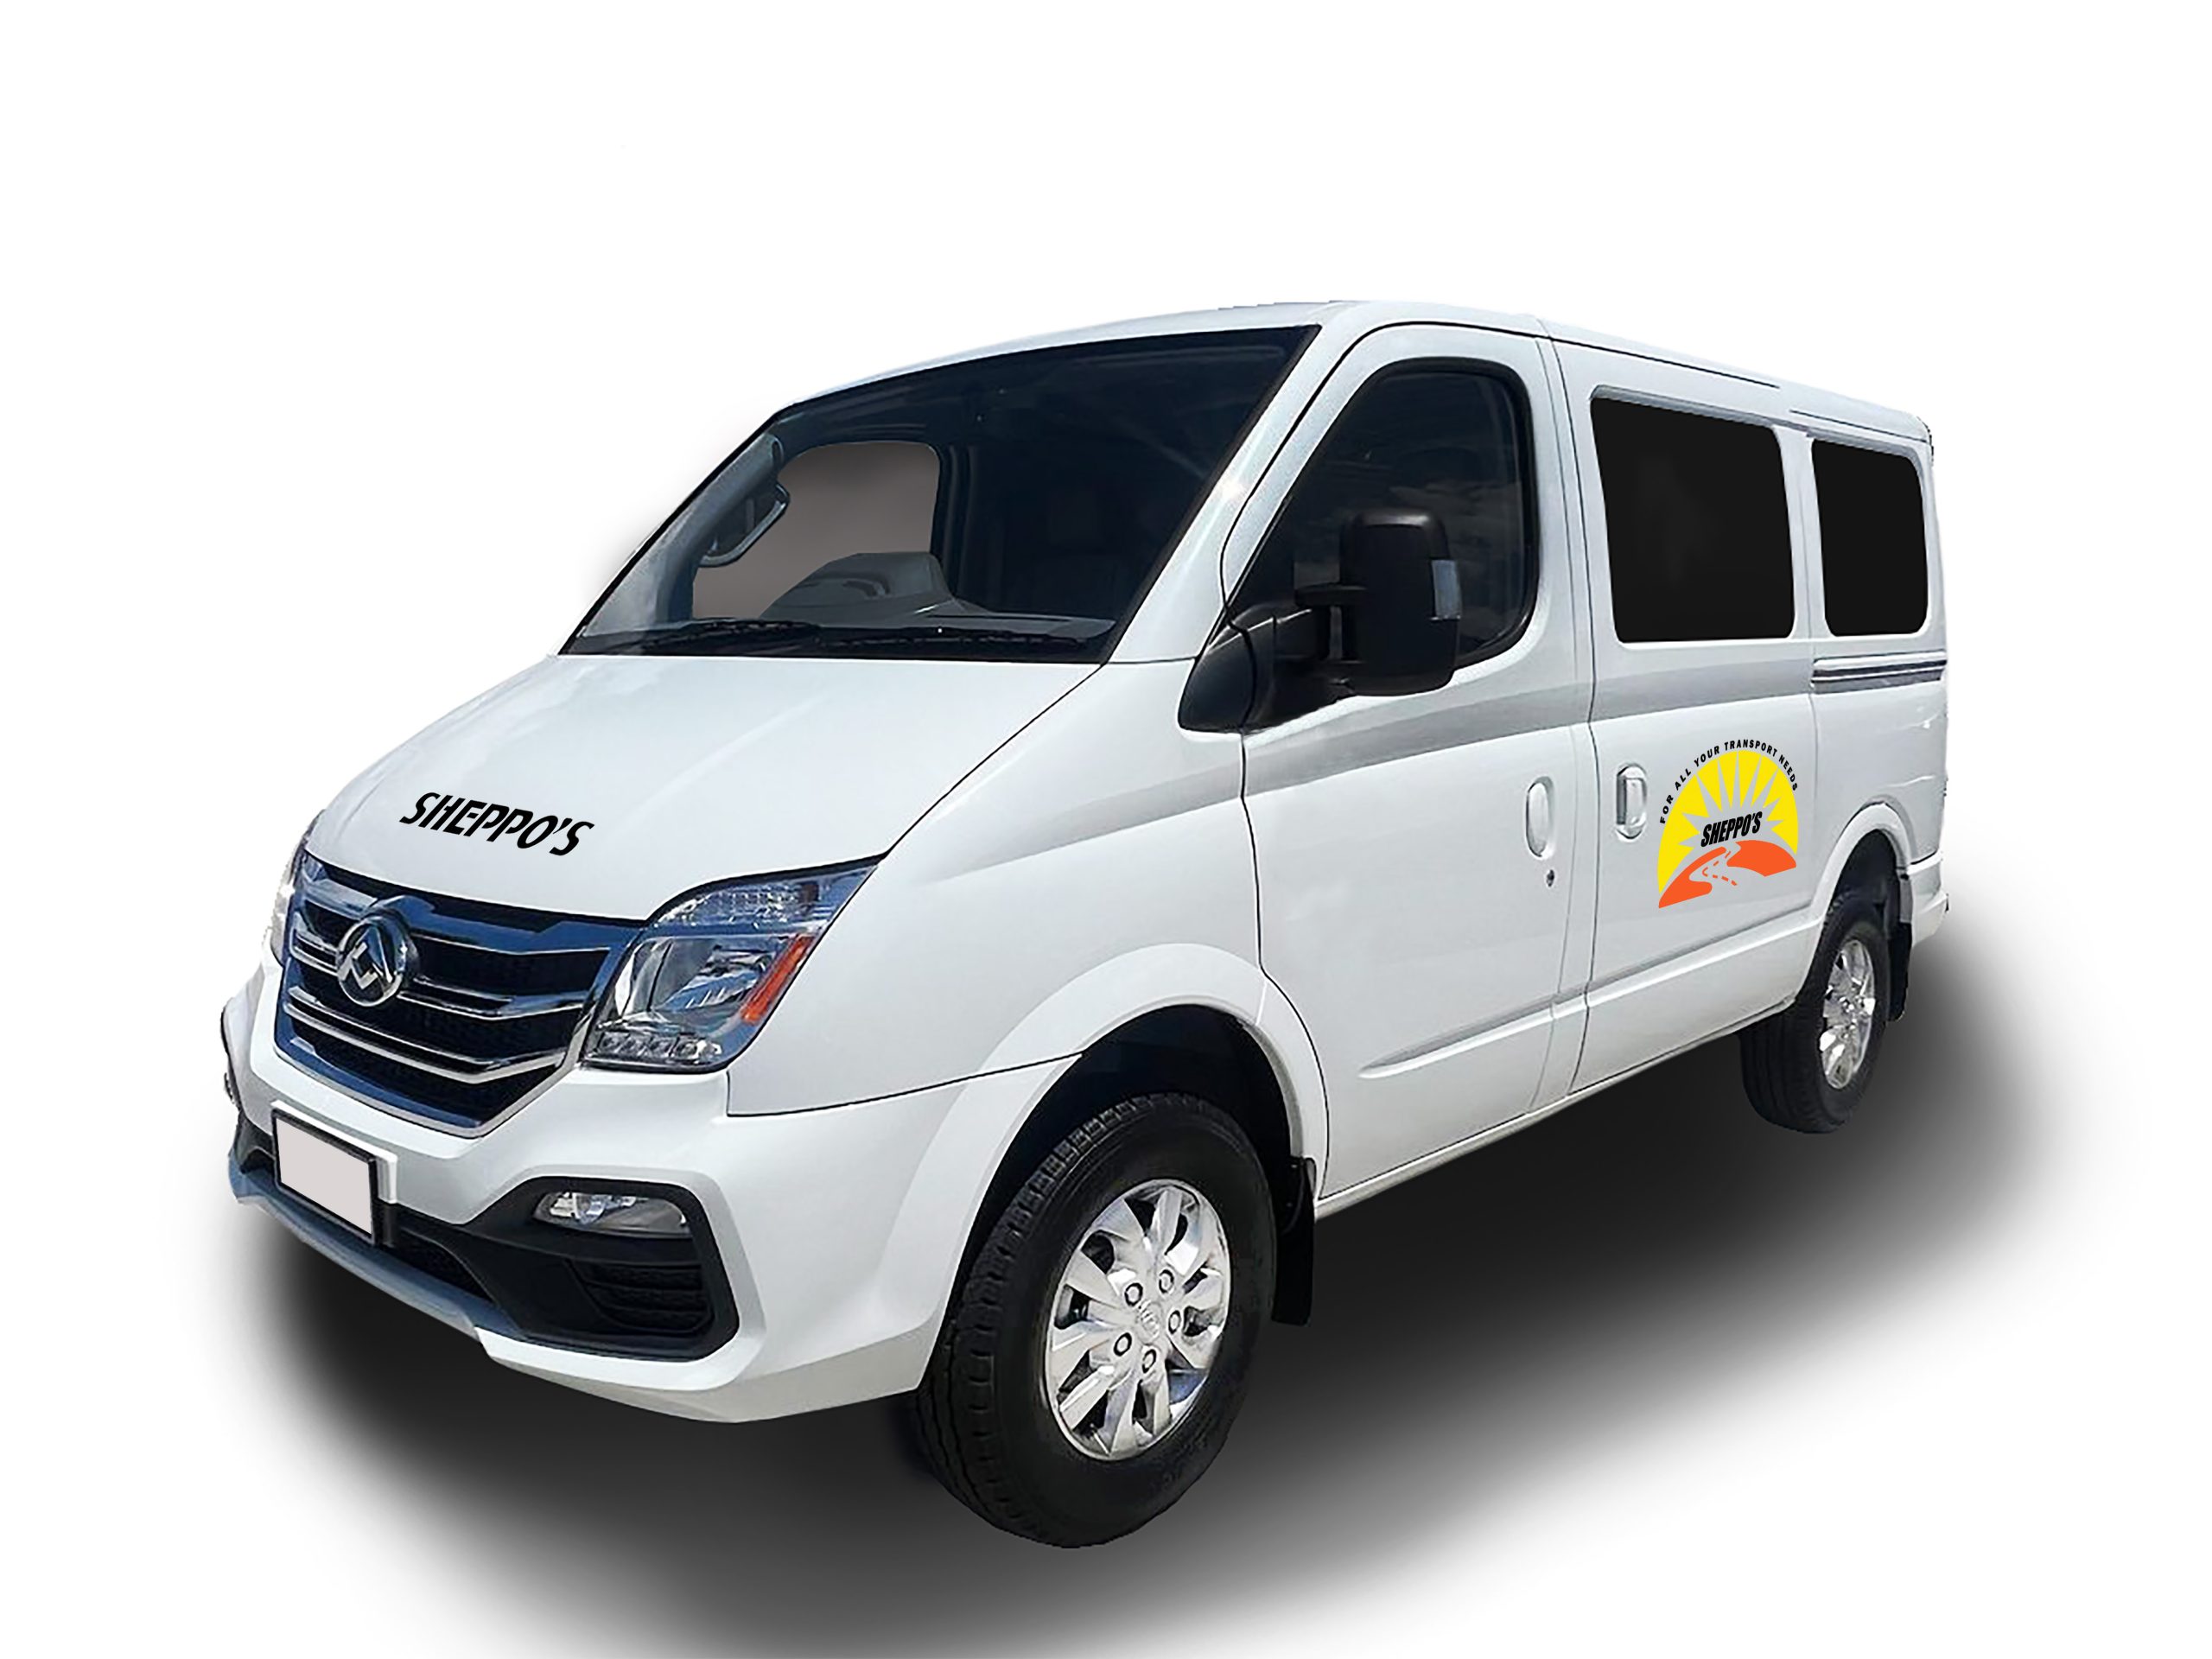 airport transfer services in sydney 